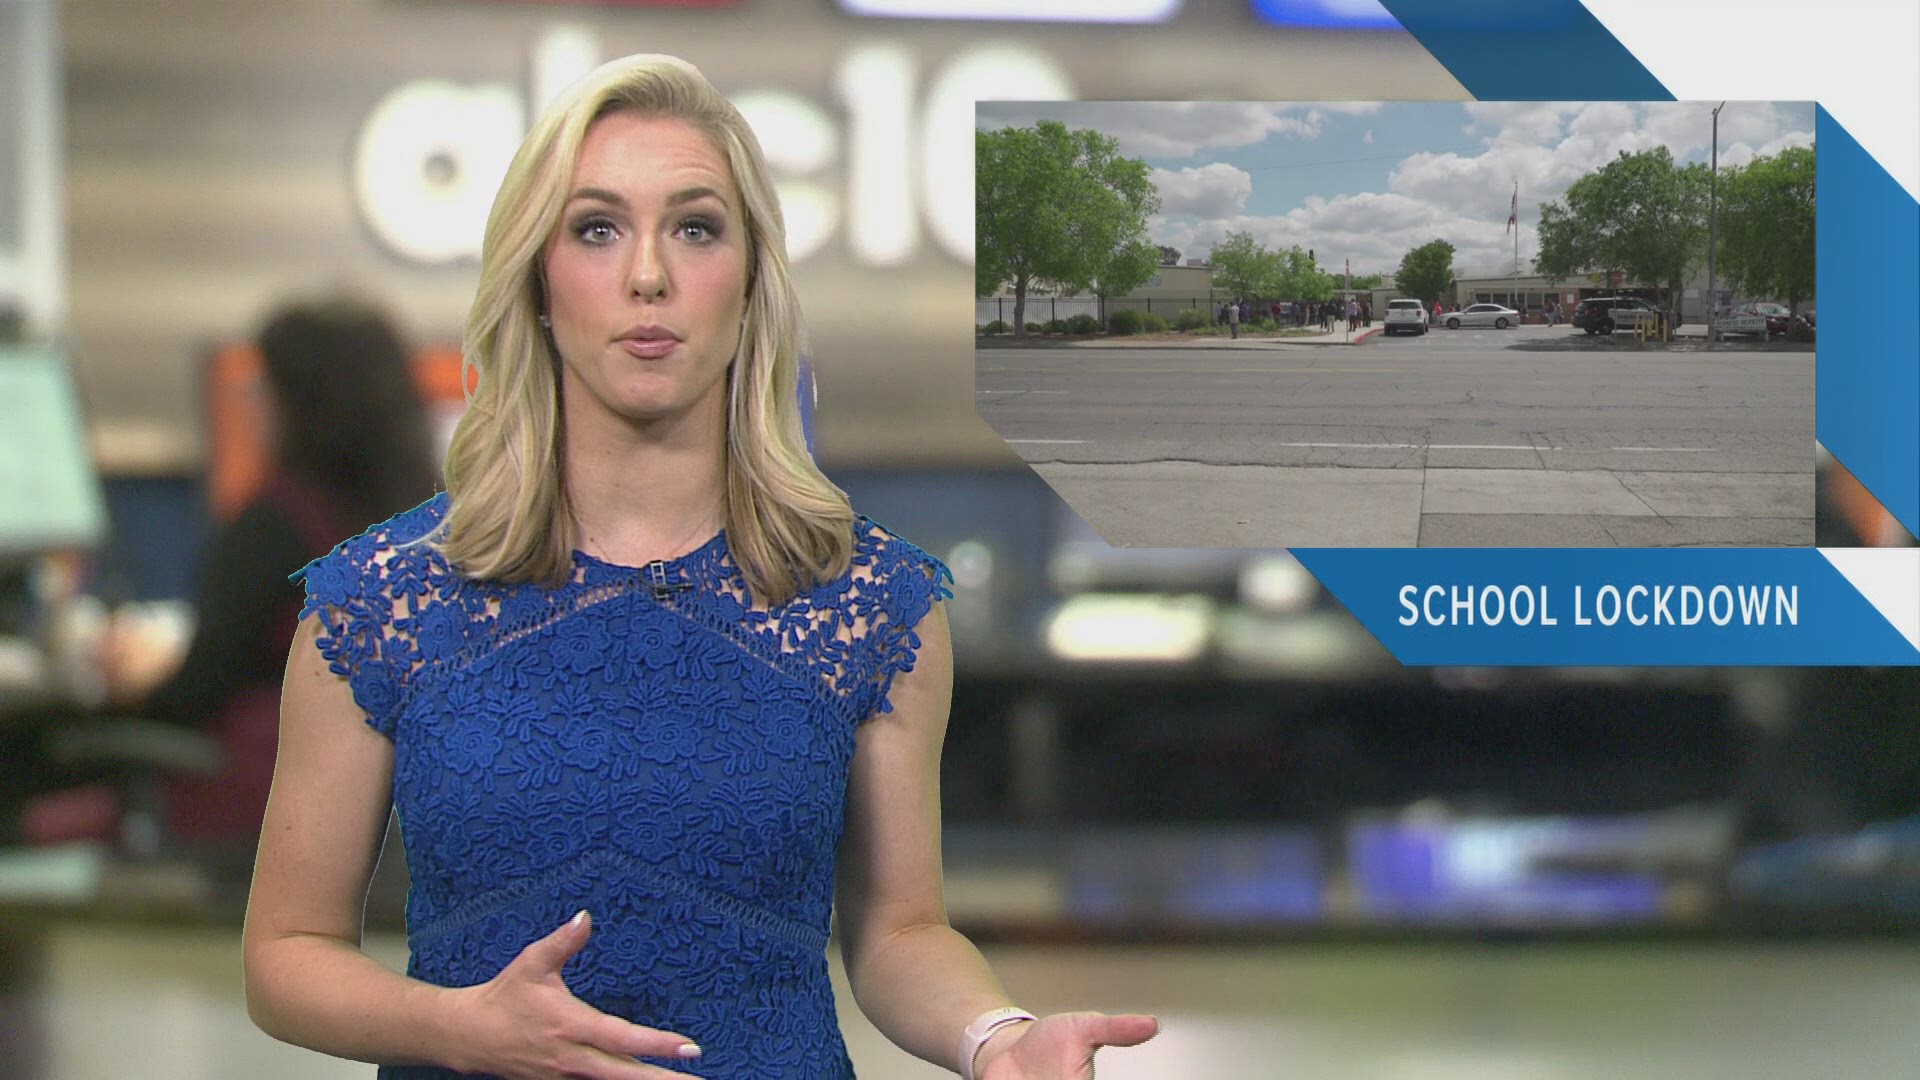 Evening Headlines: May 20, 2019 | Catch in-depth reporting on #LateNewsTonight at 11 p.m. | The latest Sacramento news is always at www.abc10.com